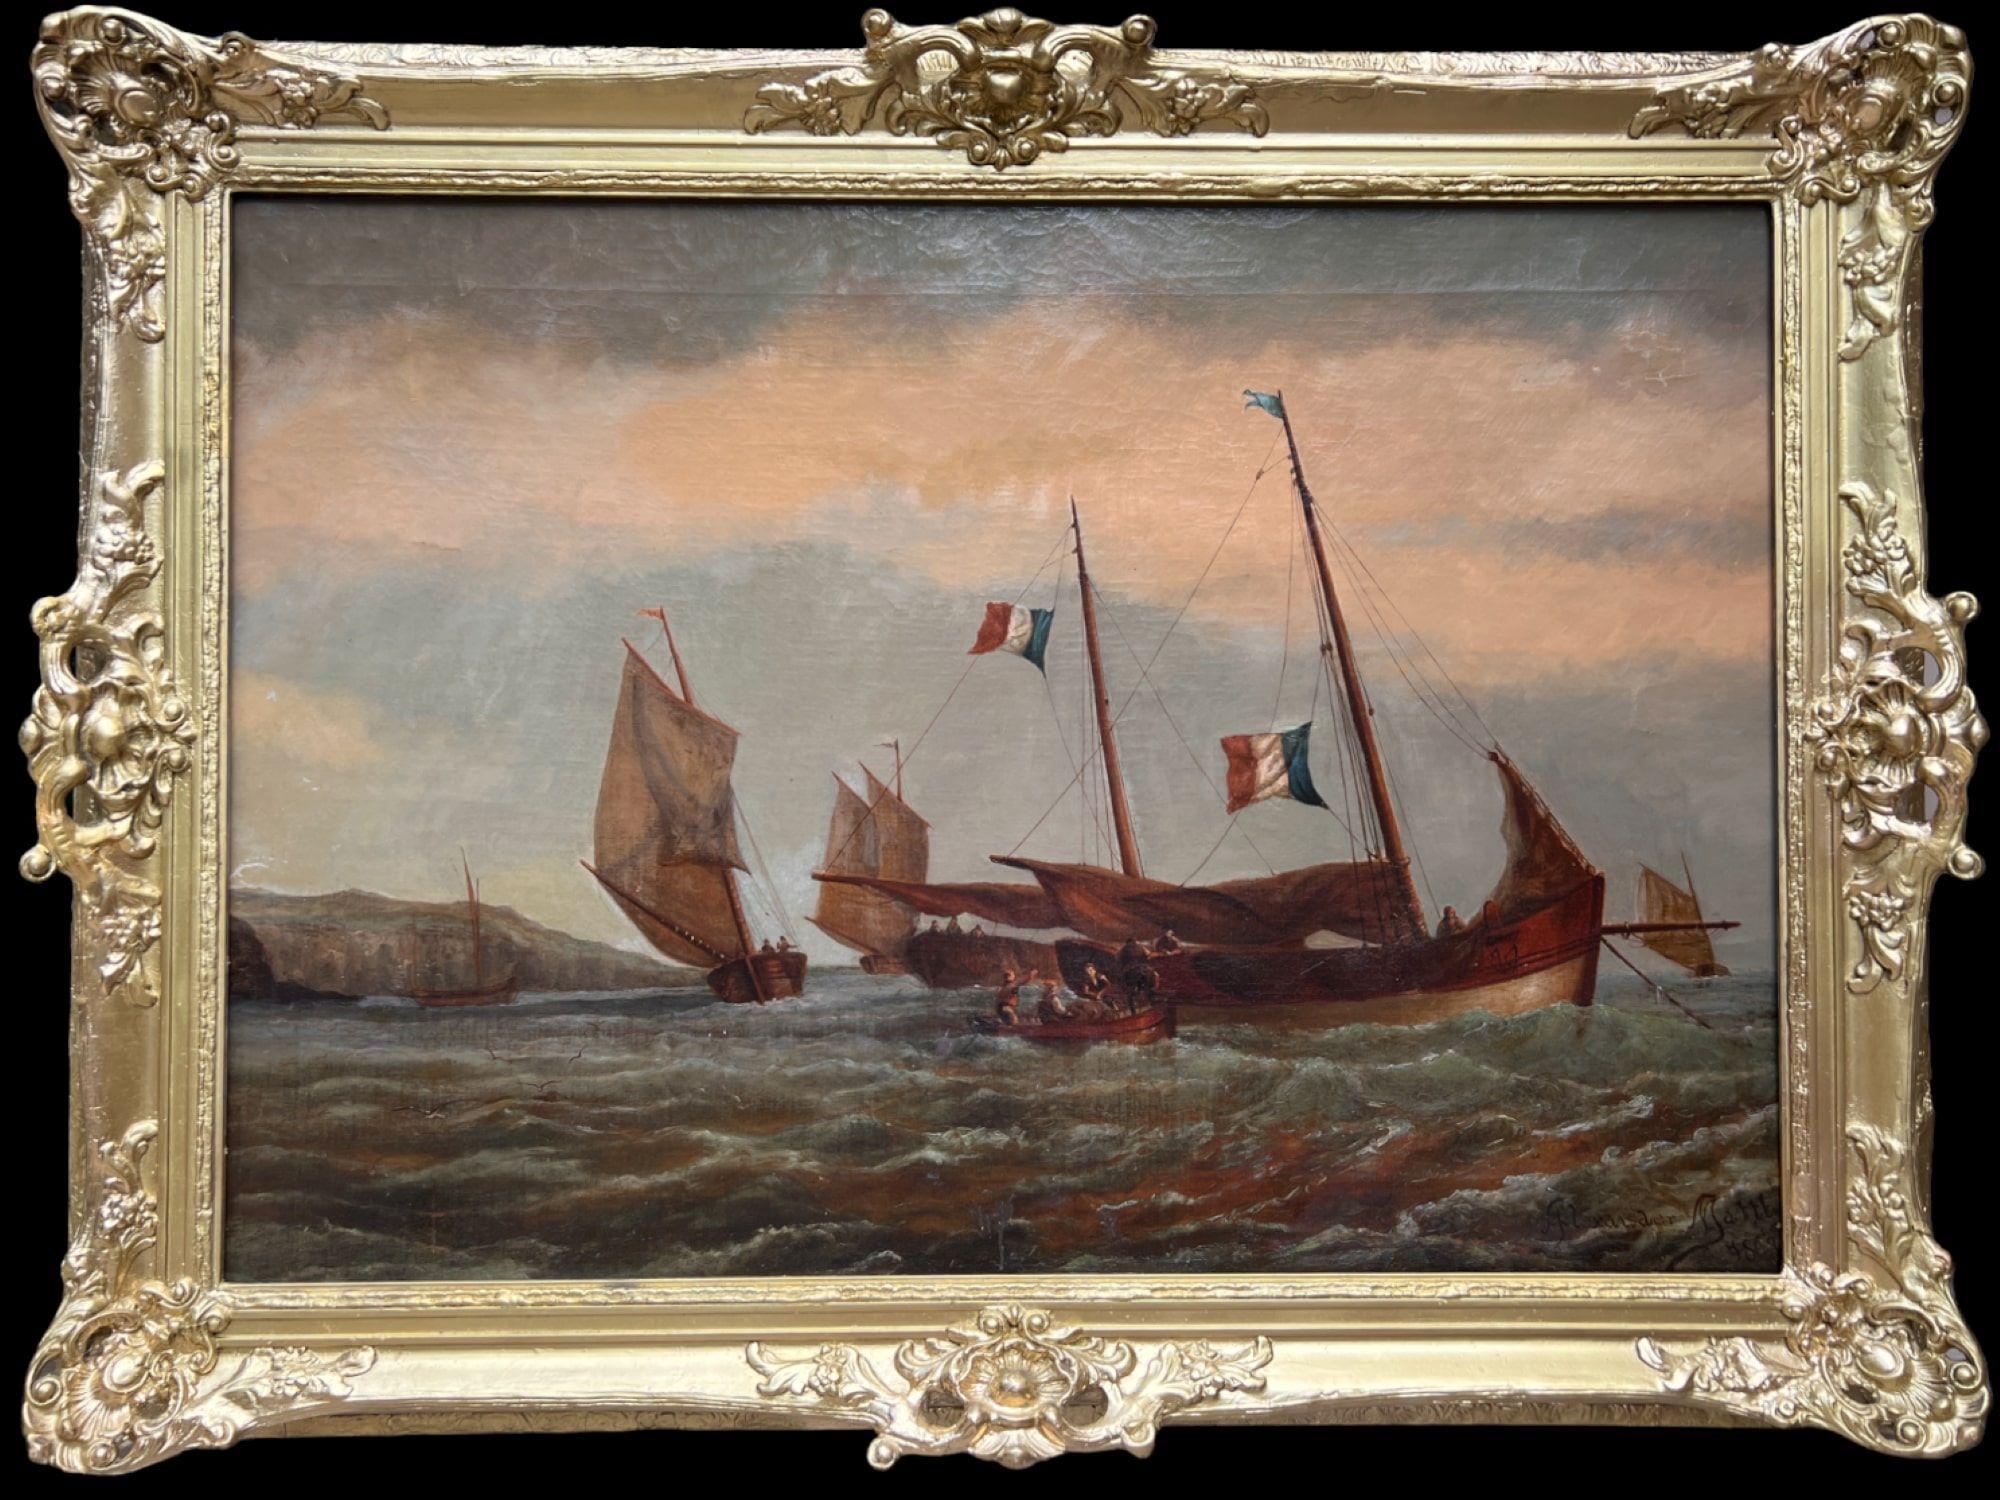 Up for sale is a phenomenal antique Dutch school original large oil painting on canvas depicting a seascape -  several sailboats on the high seas close to the coast and a boat with fishermen or sailors. 

Signed in a lower-right corner Alexander